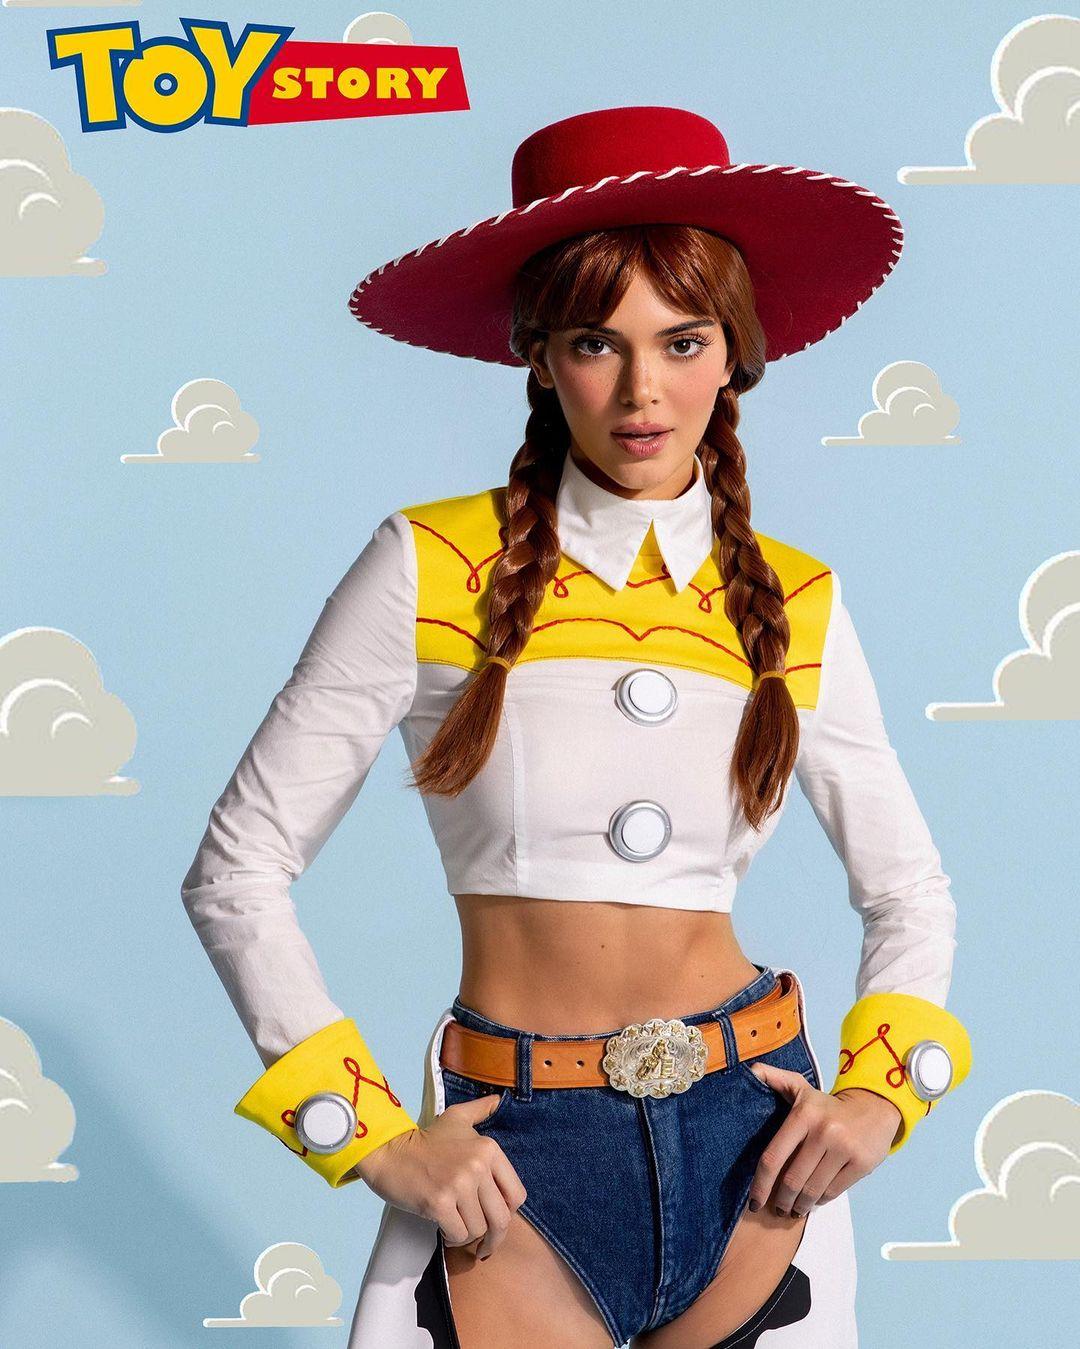 Kendall Jenner as Jessie from 